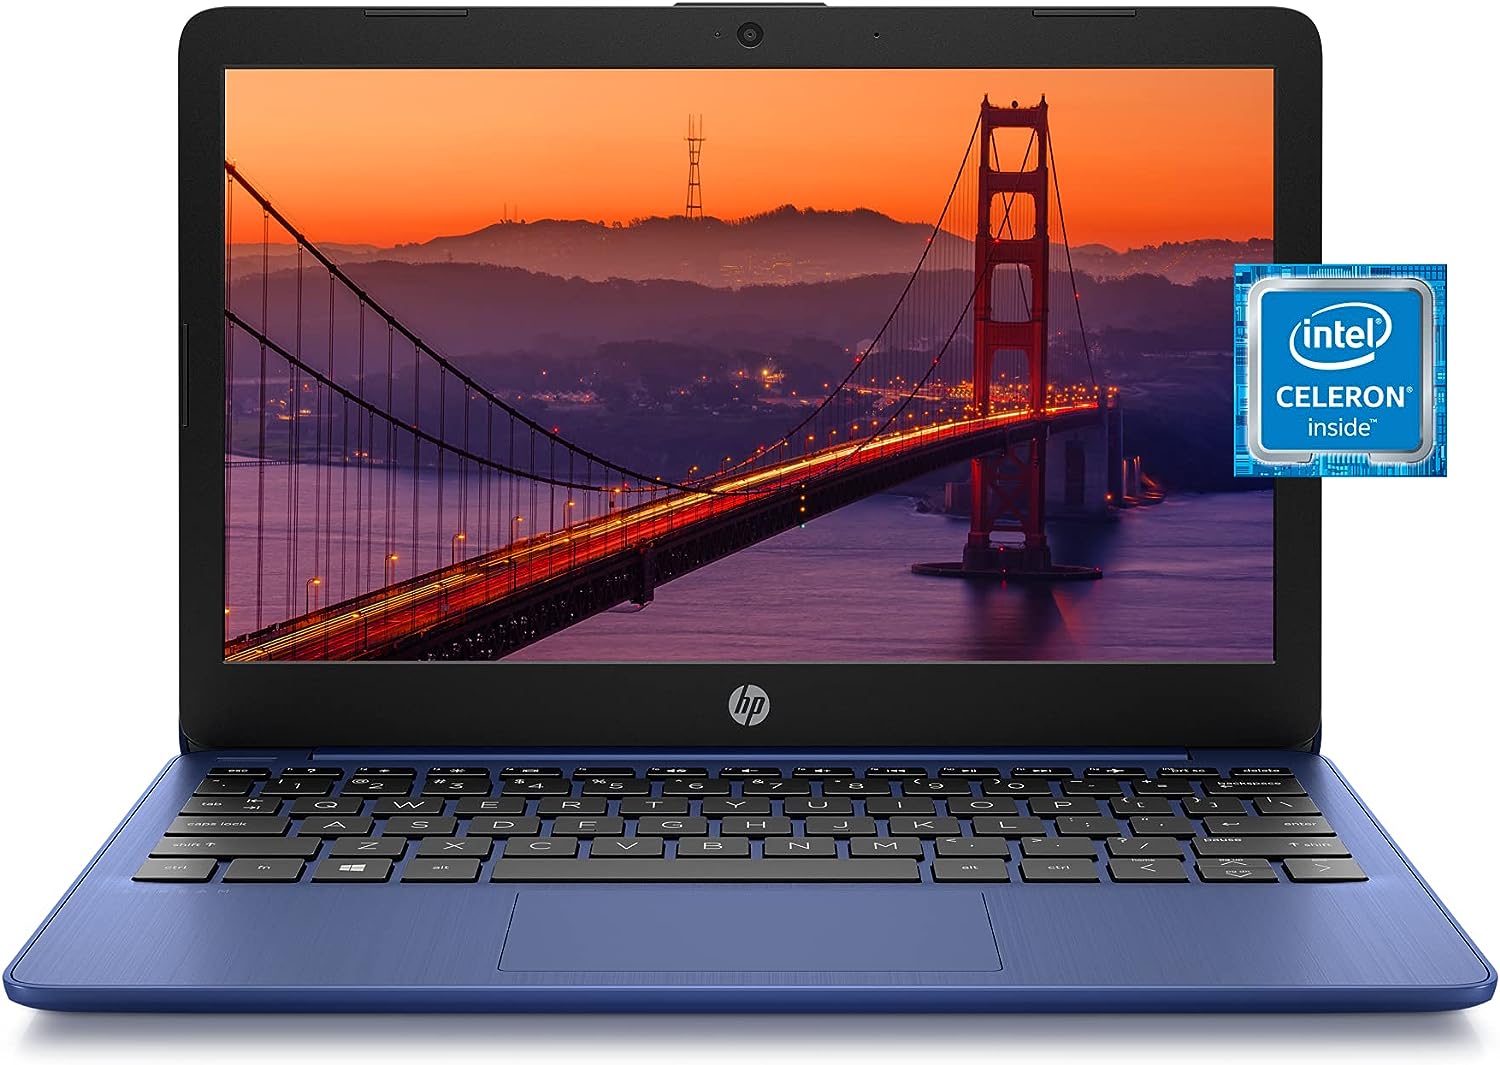 11 inch laptops detailed review